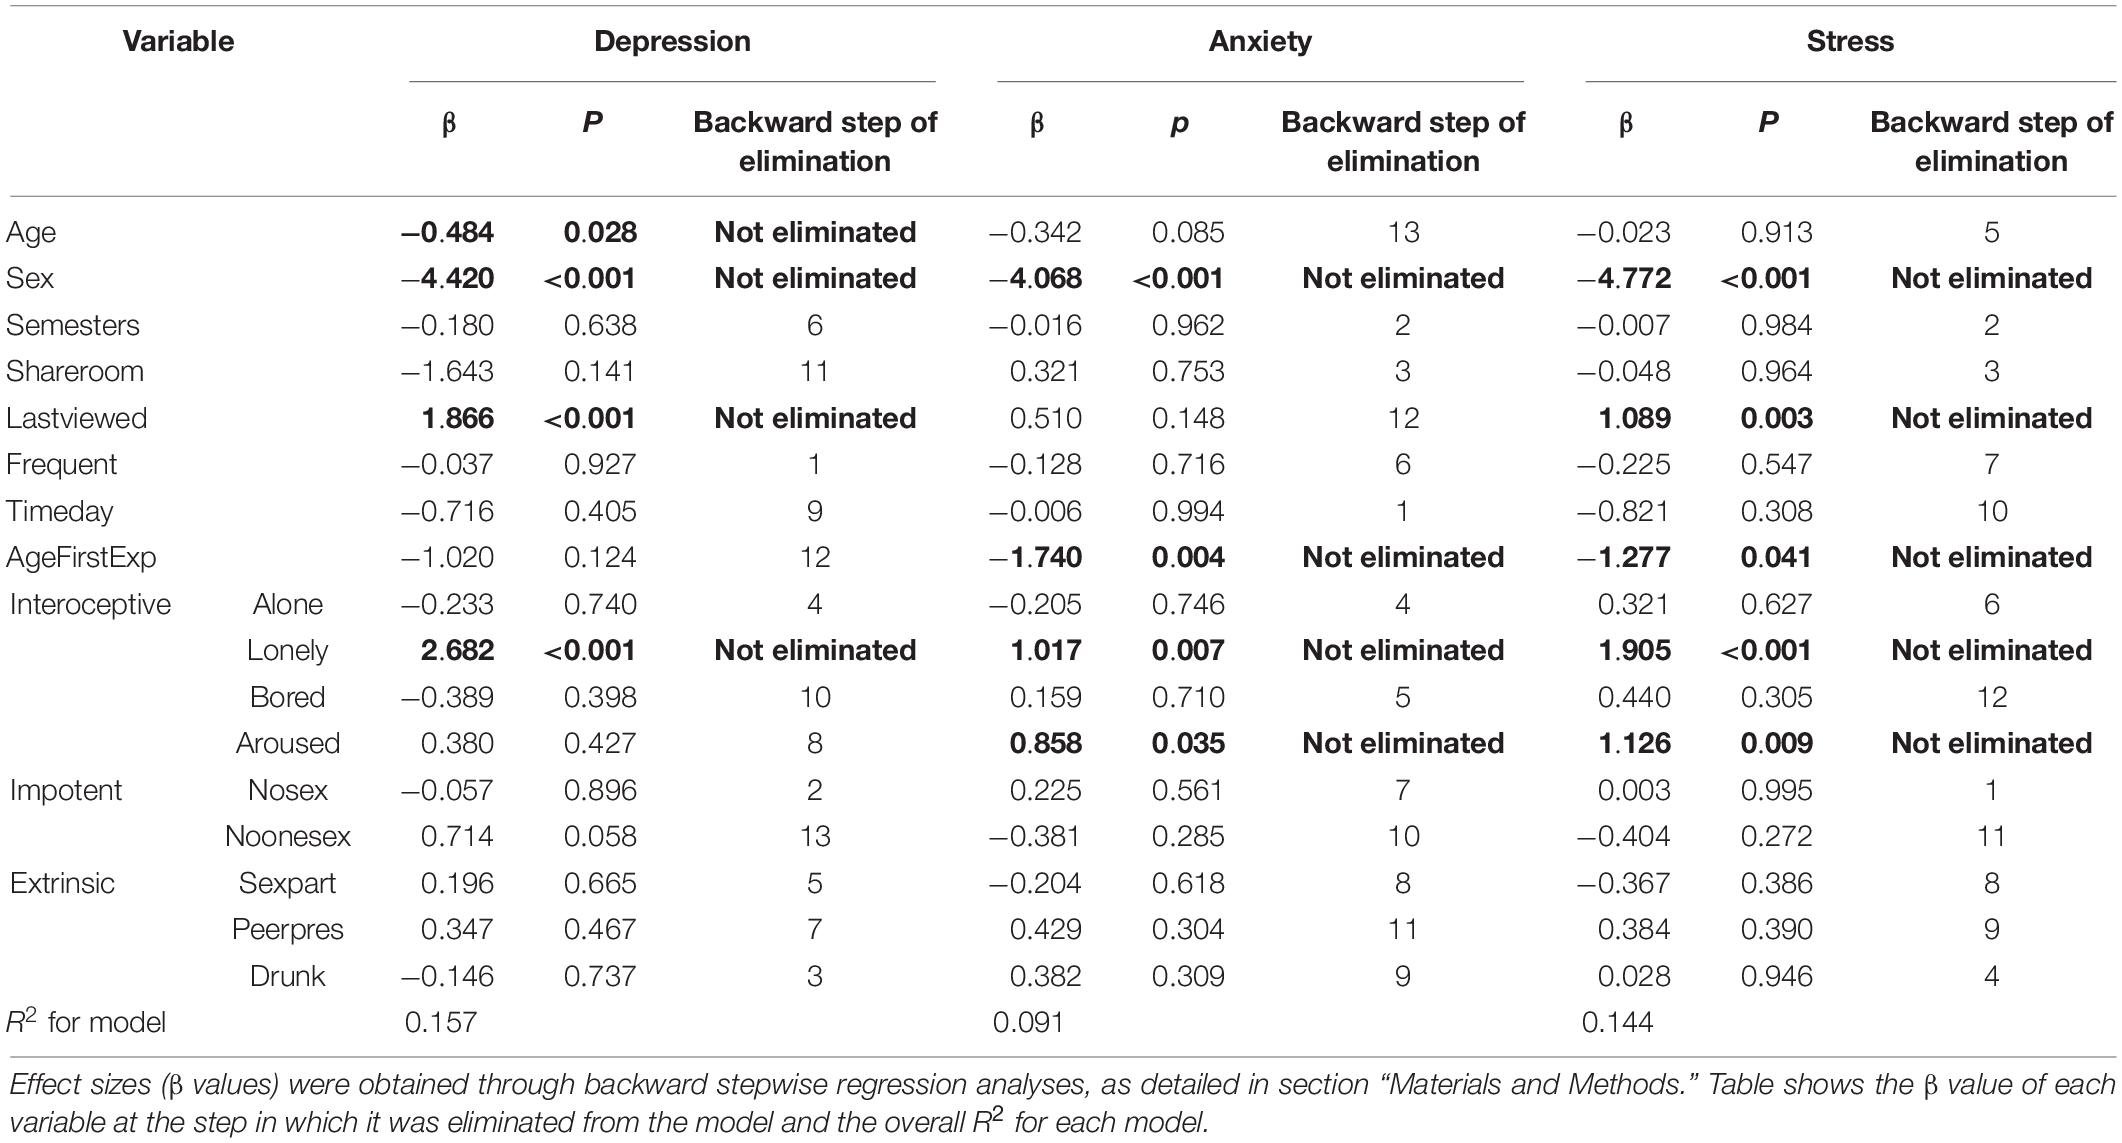 15yars Xxx - Frontiers | Compulsive Internet Pornography Use and Mental Health: A  Cross-Sectional Study in a Sample of University Students in the United  States